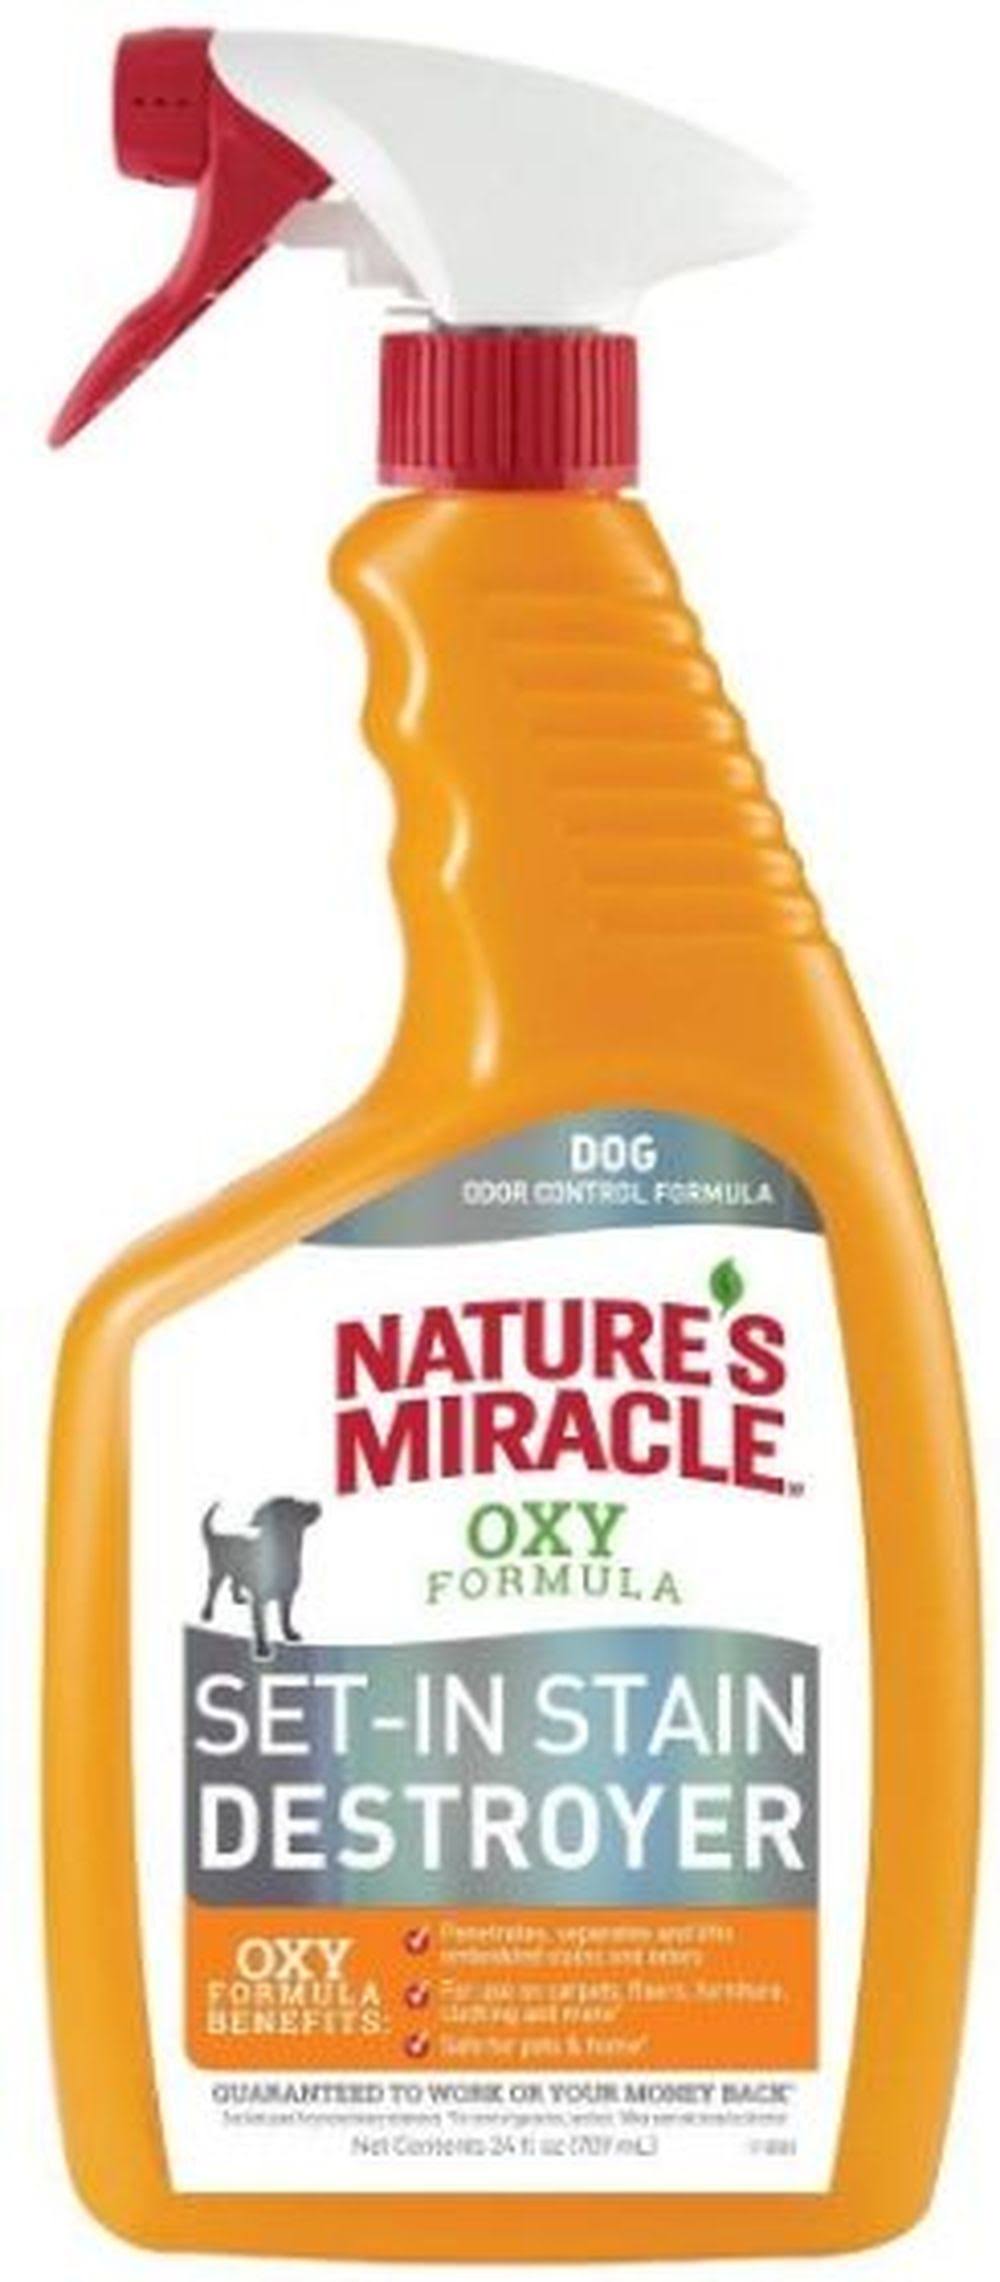 Nature's Miracle Set in Stain Pet Odour Destroyer 709ml